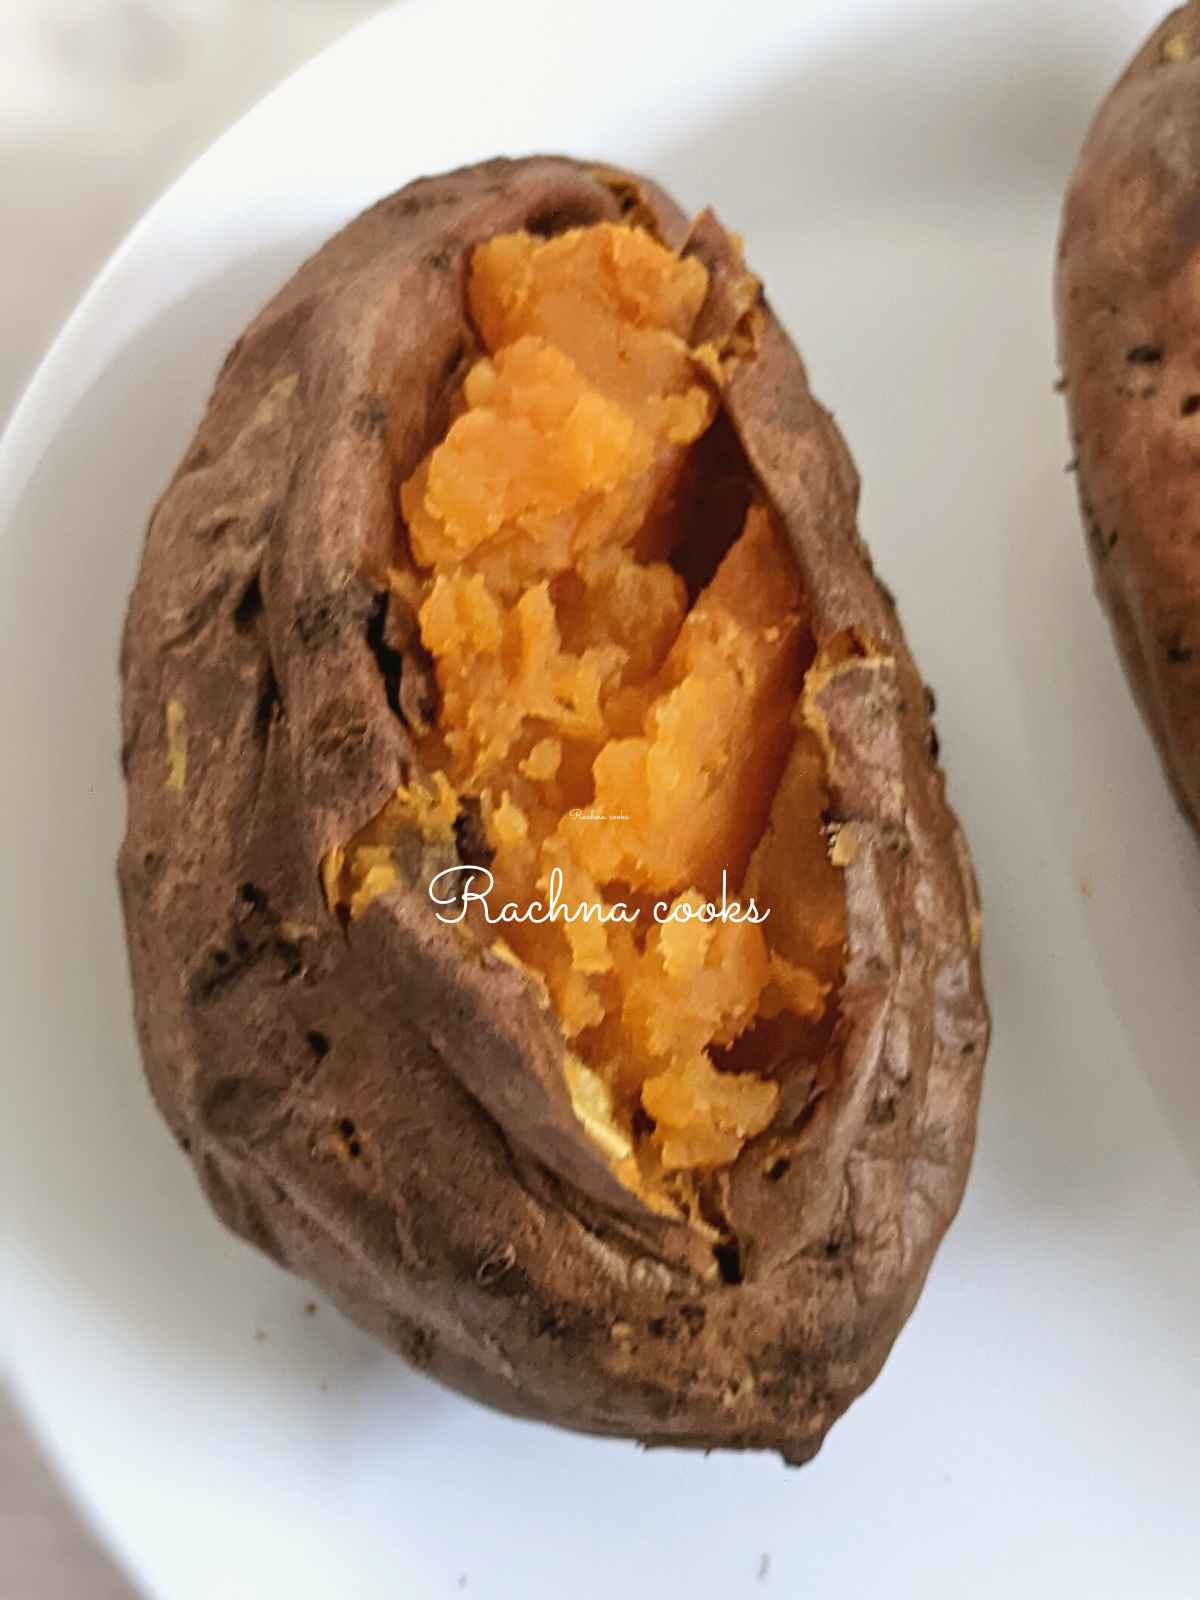 One large air fried baked sweet potato with wrinkly skin and fluffy flesh on a white plate.